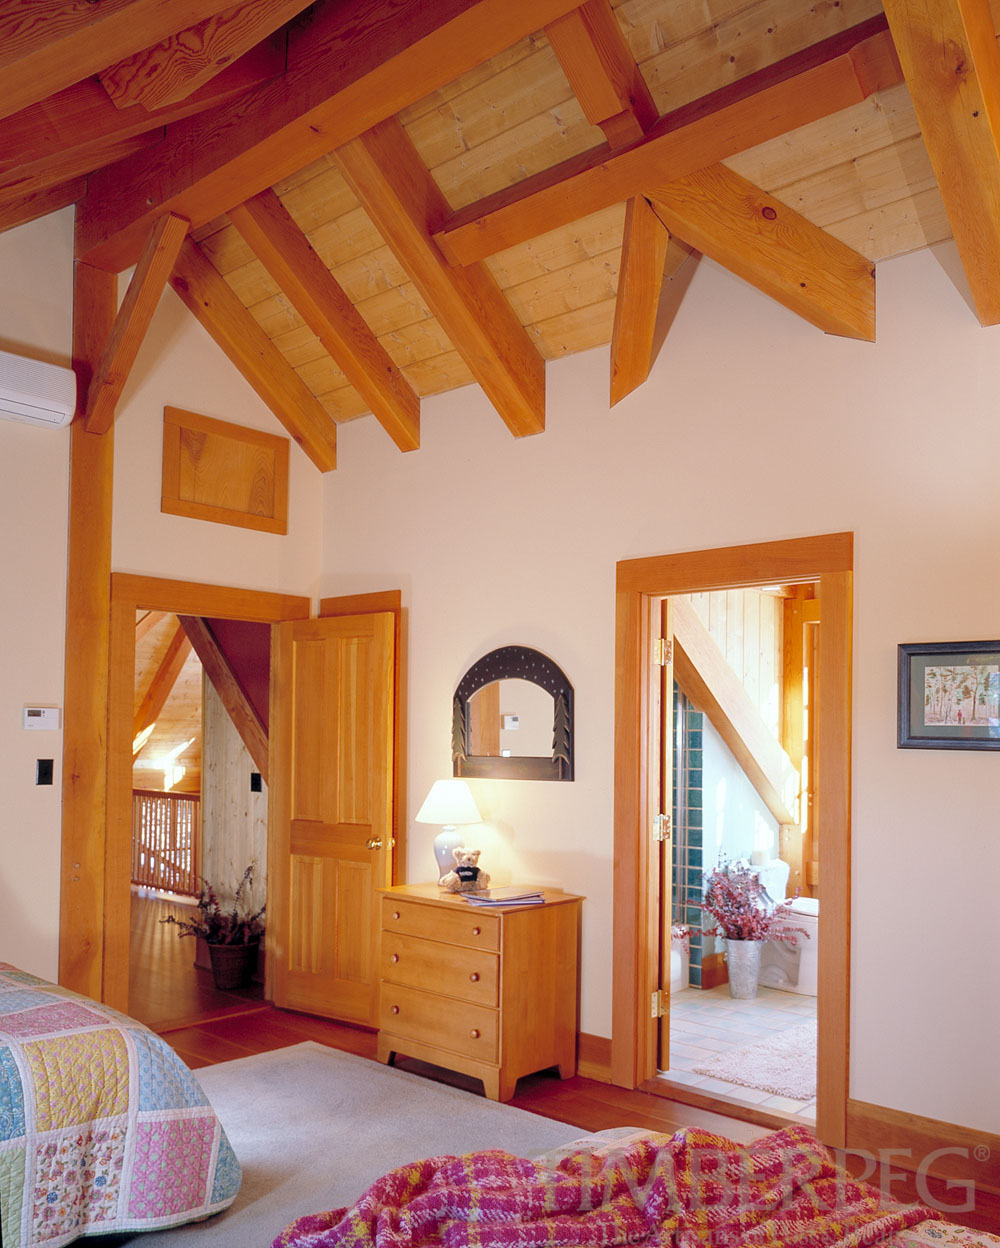 The Ascutney (5719) bedroom with cathedral ceiling